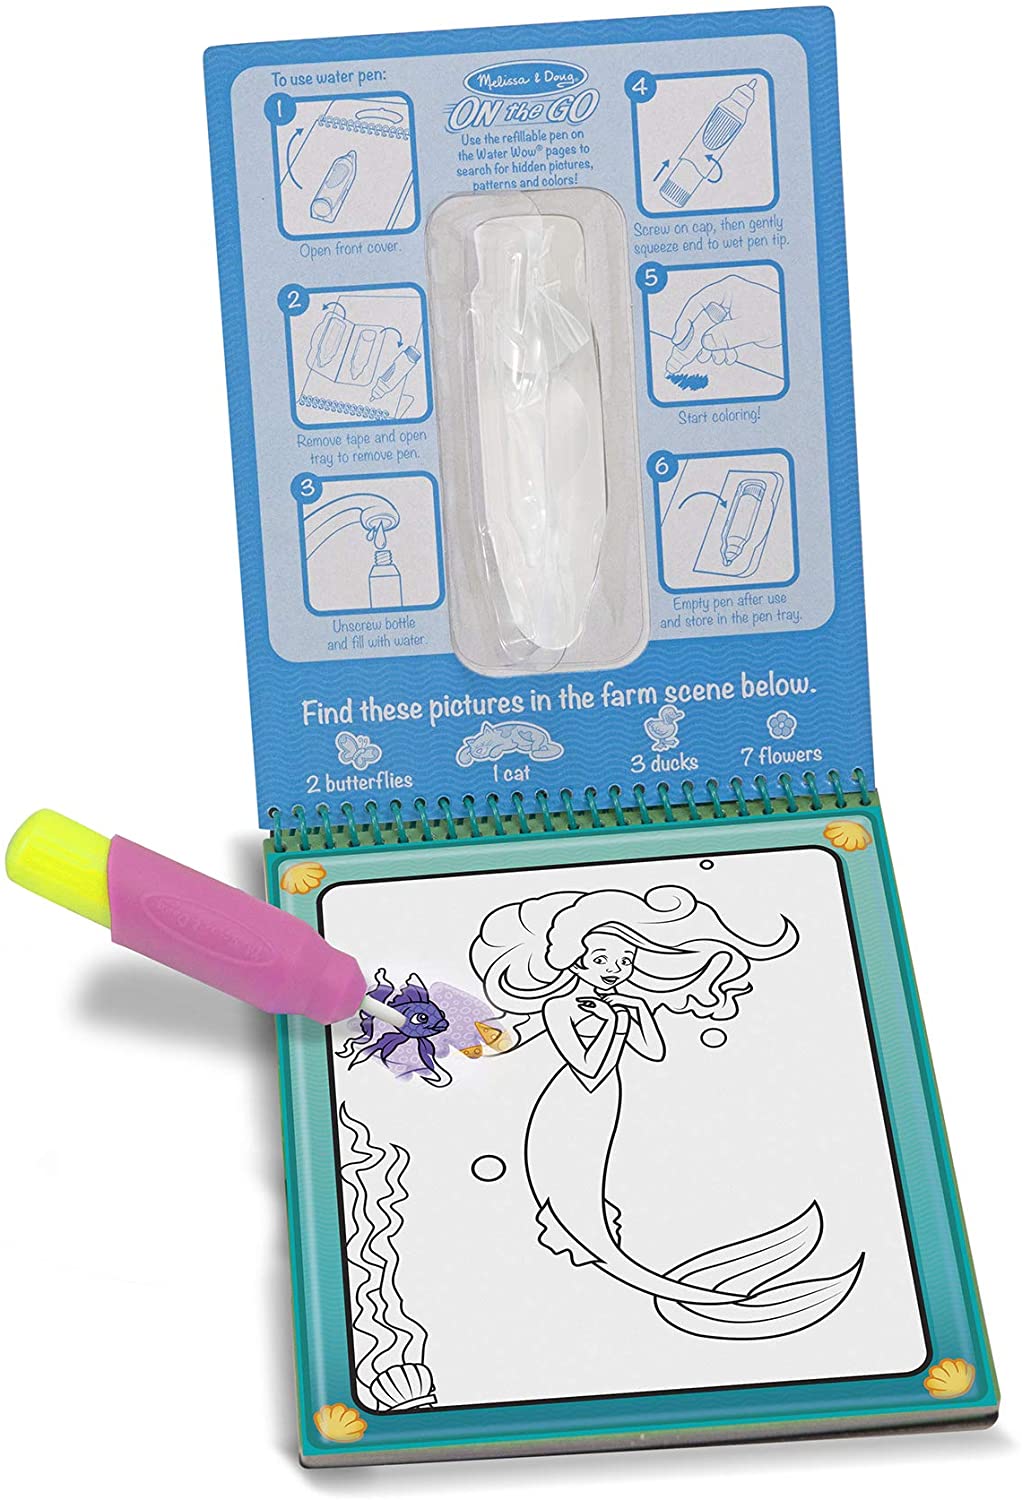 Water Wow! Fairy Tale - On the Go Travel Activity - A2Z Science & Learning  Toy Store